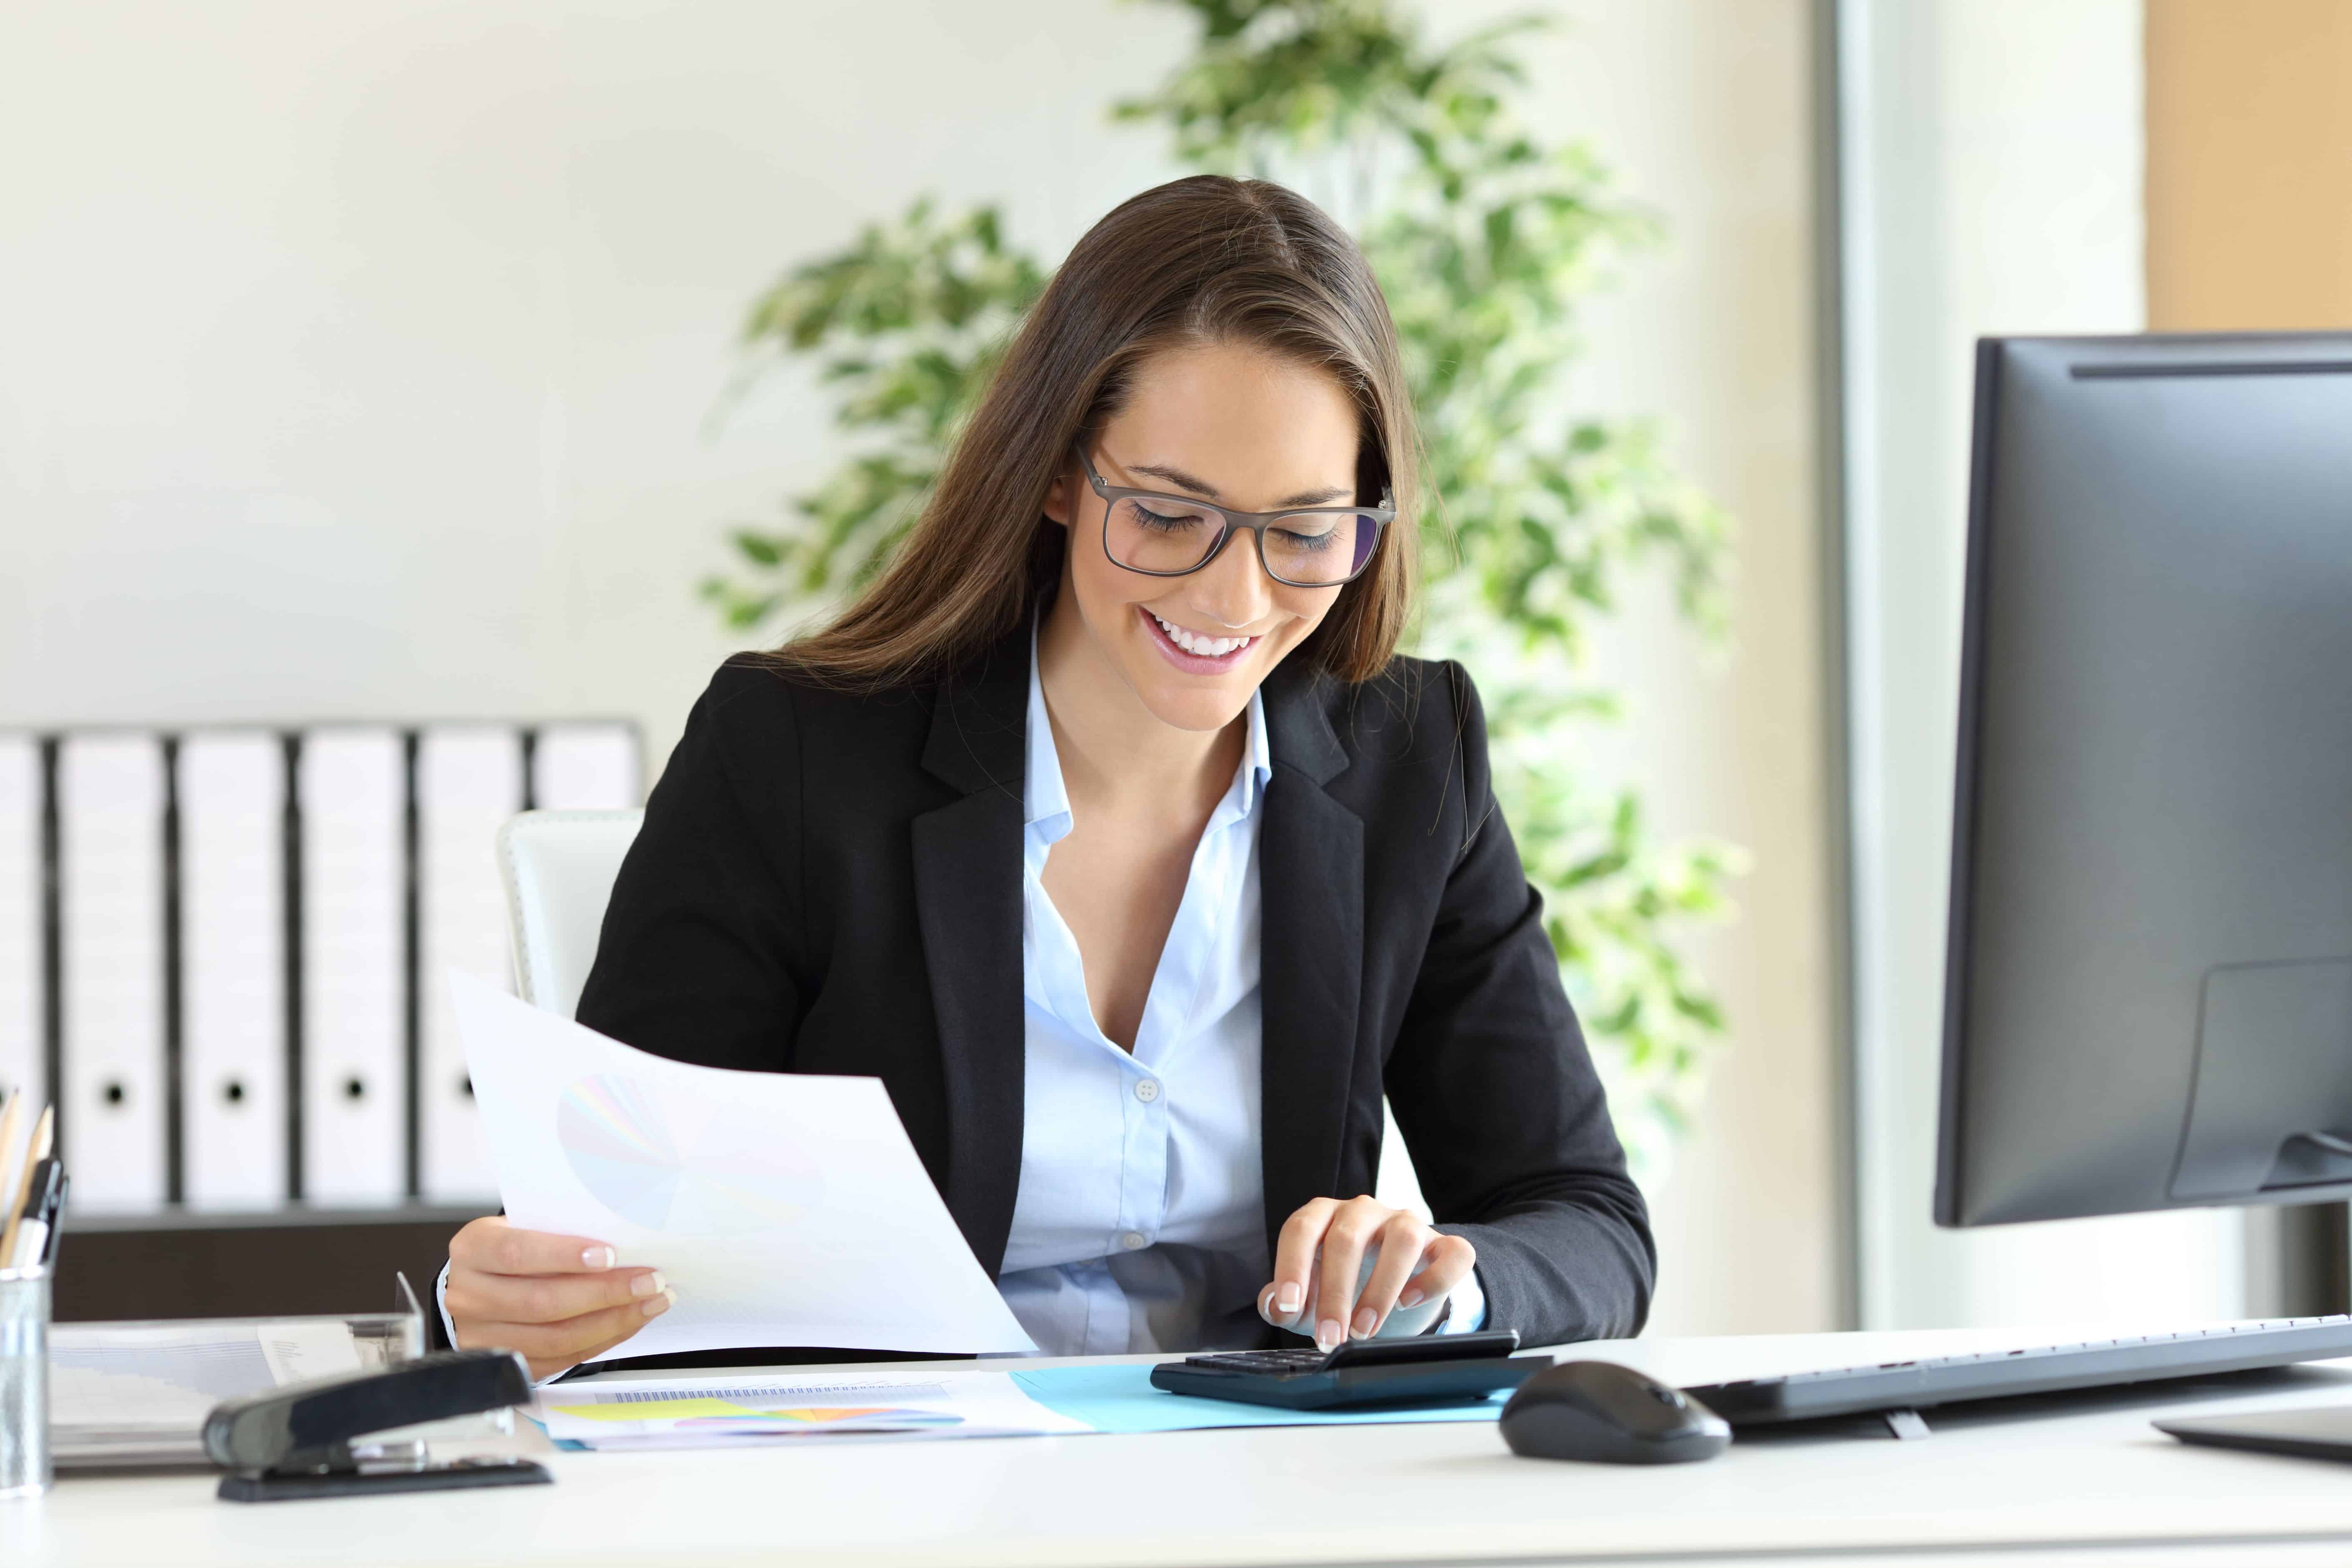 Happy businesswoman wearing suit working using a calculator in a desk at office